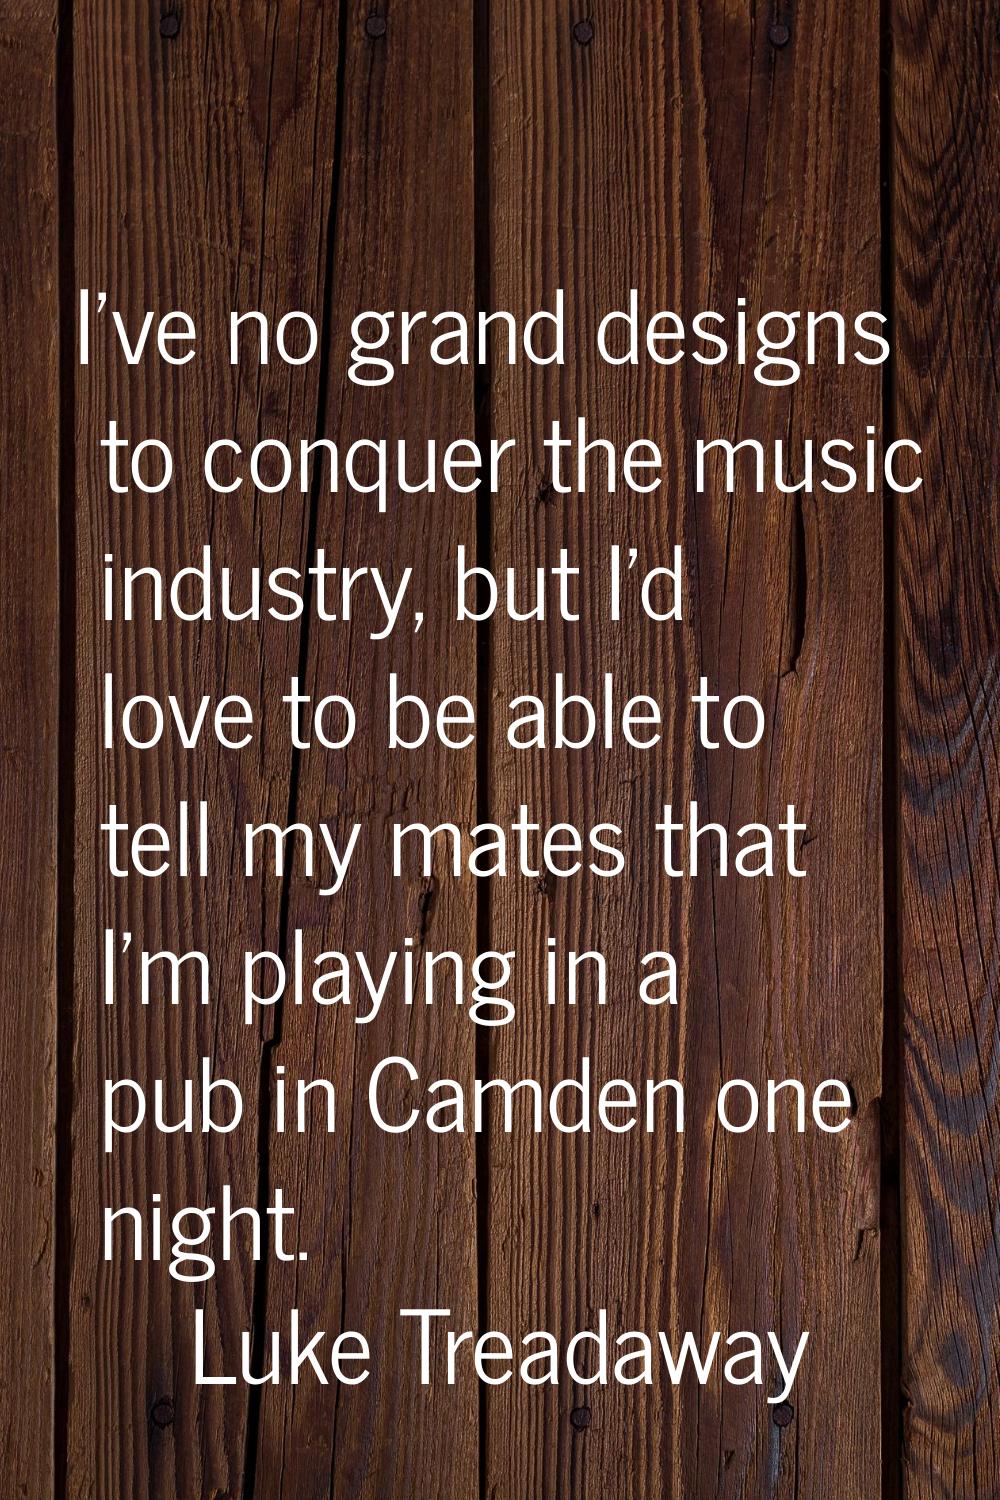 I've no grand designs to conquer the music industry, but I'd love to be able to tell my mates that 